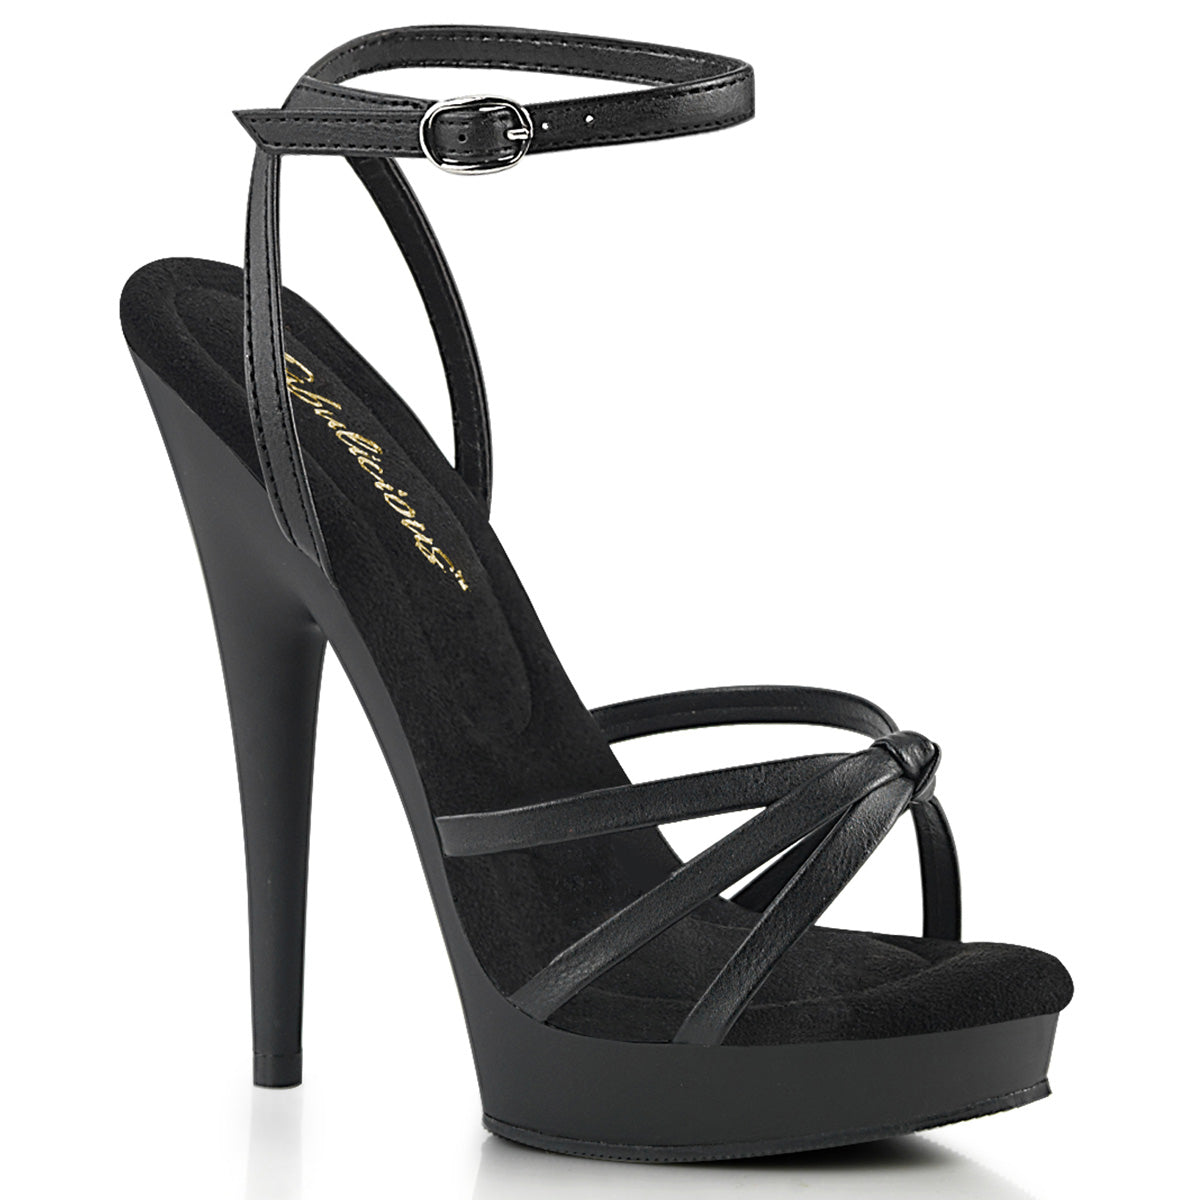 SULTRY-638 Black Faux Leather Sandals